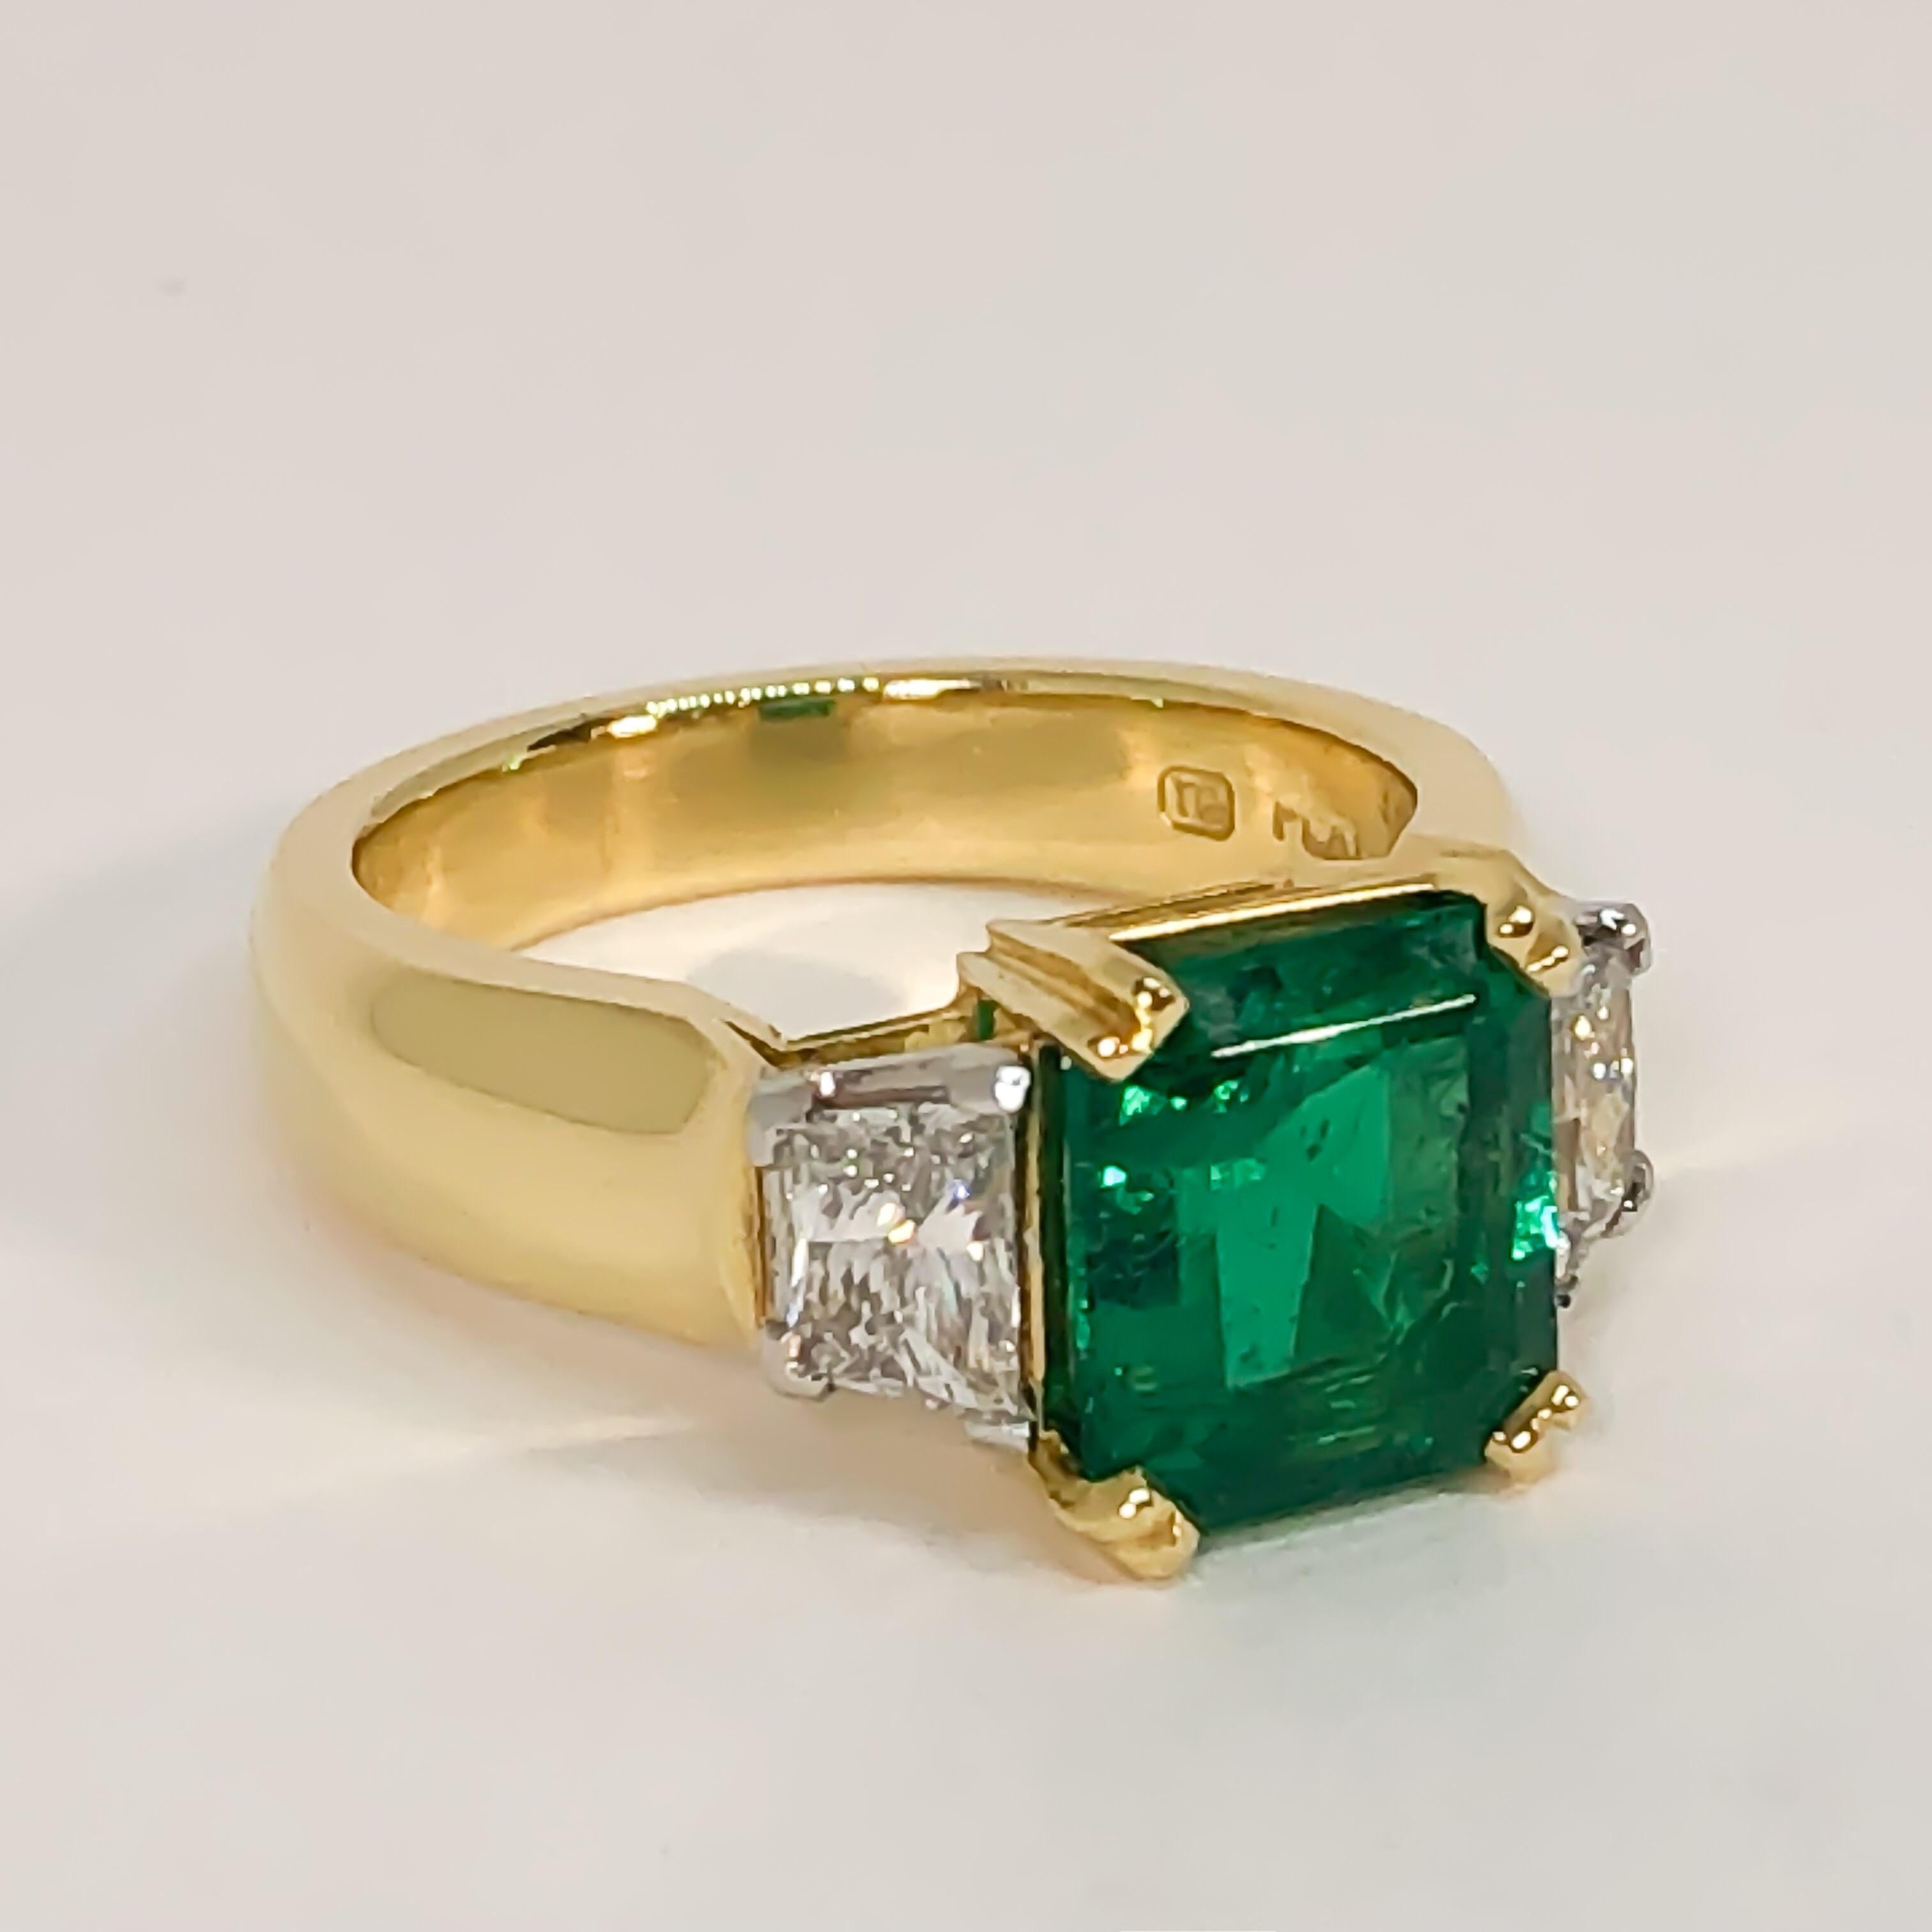 Natural Colombian emerald and diamond ring designed and handmade by Mark Areias Jewelers. Fashioned from 18 karat yellow gold and platinum and set with a stunning fine quality natural emerald, flanked by two trapezoid diamonds. The emerald is set in